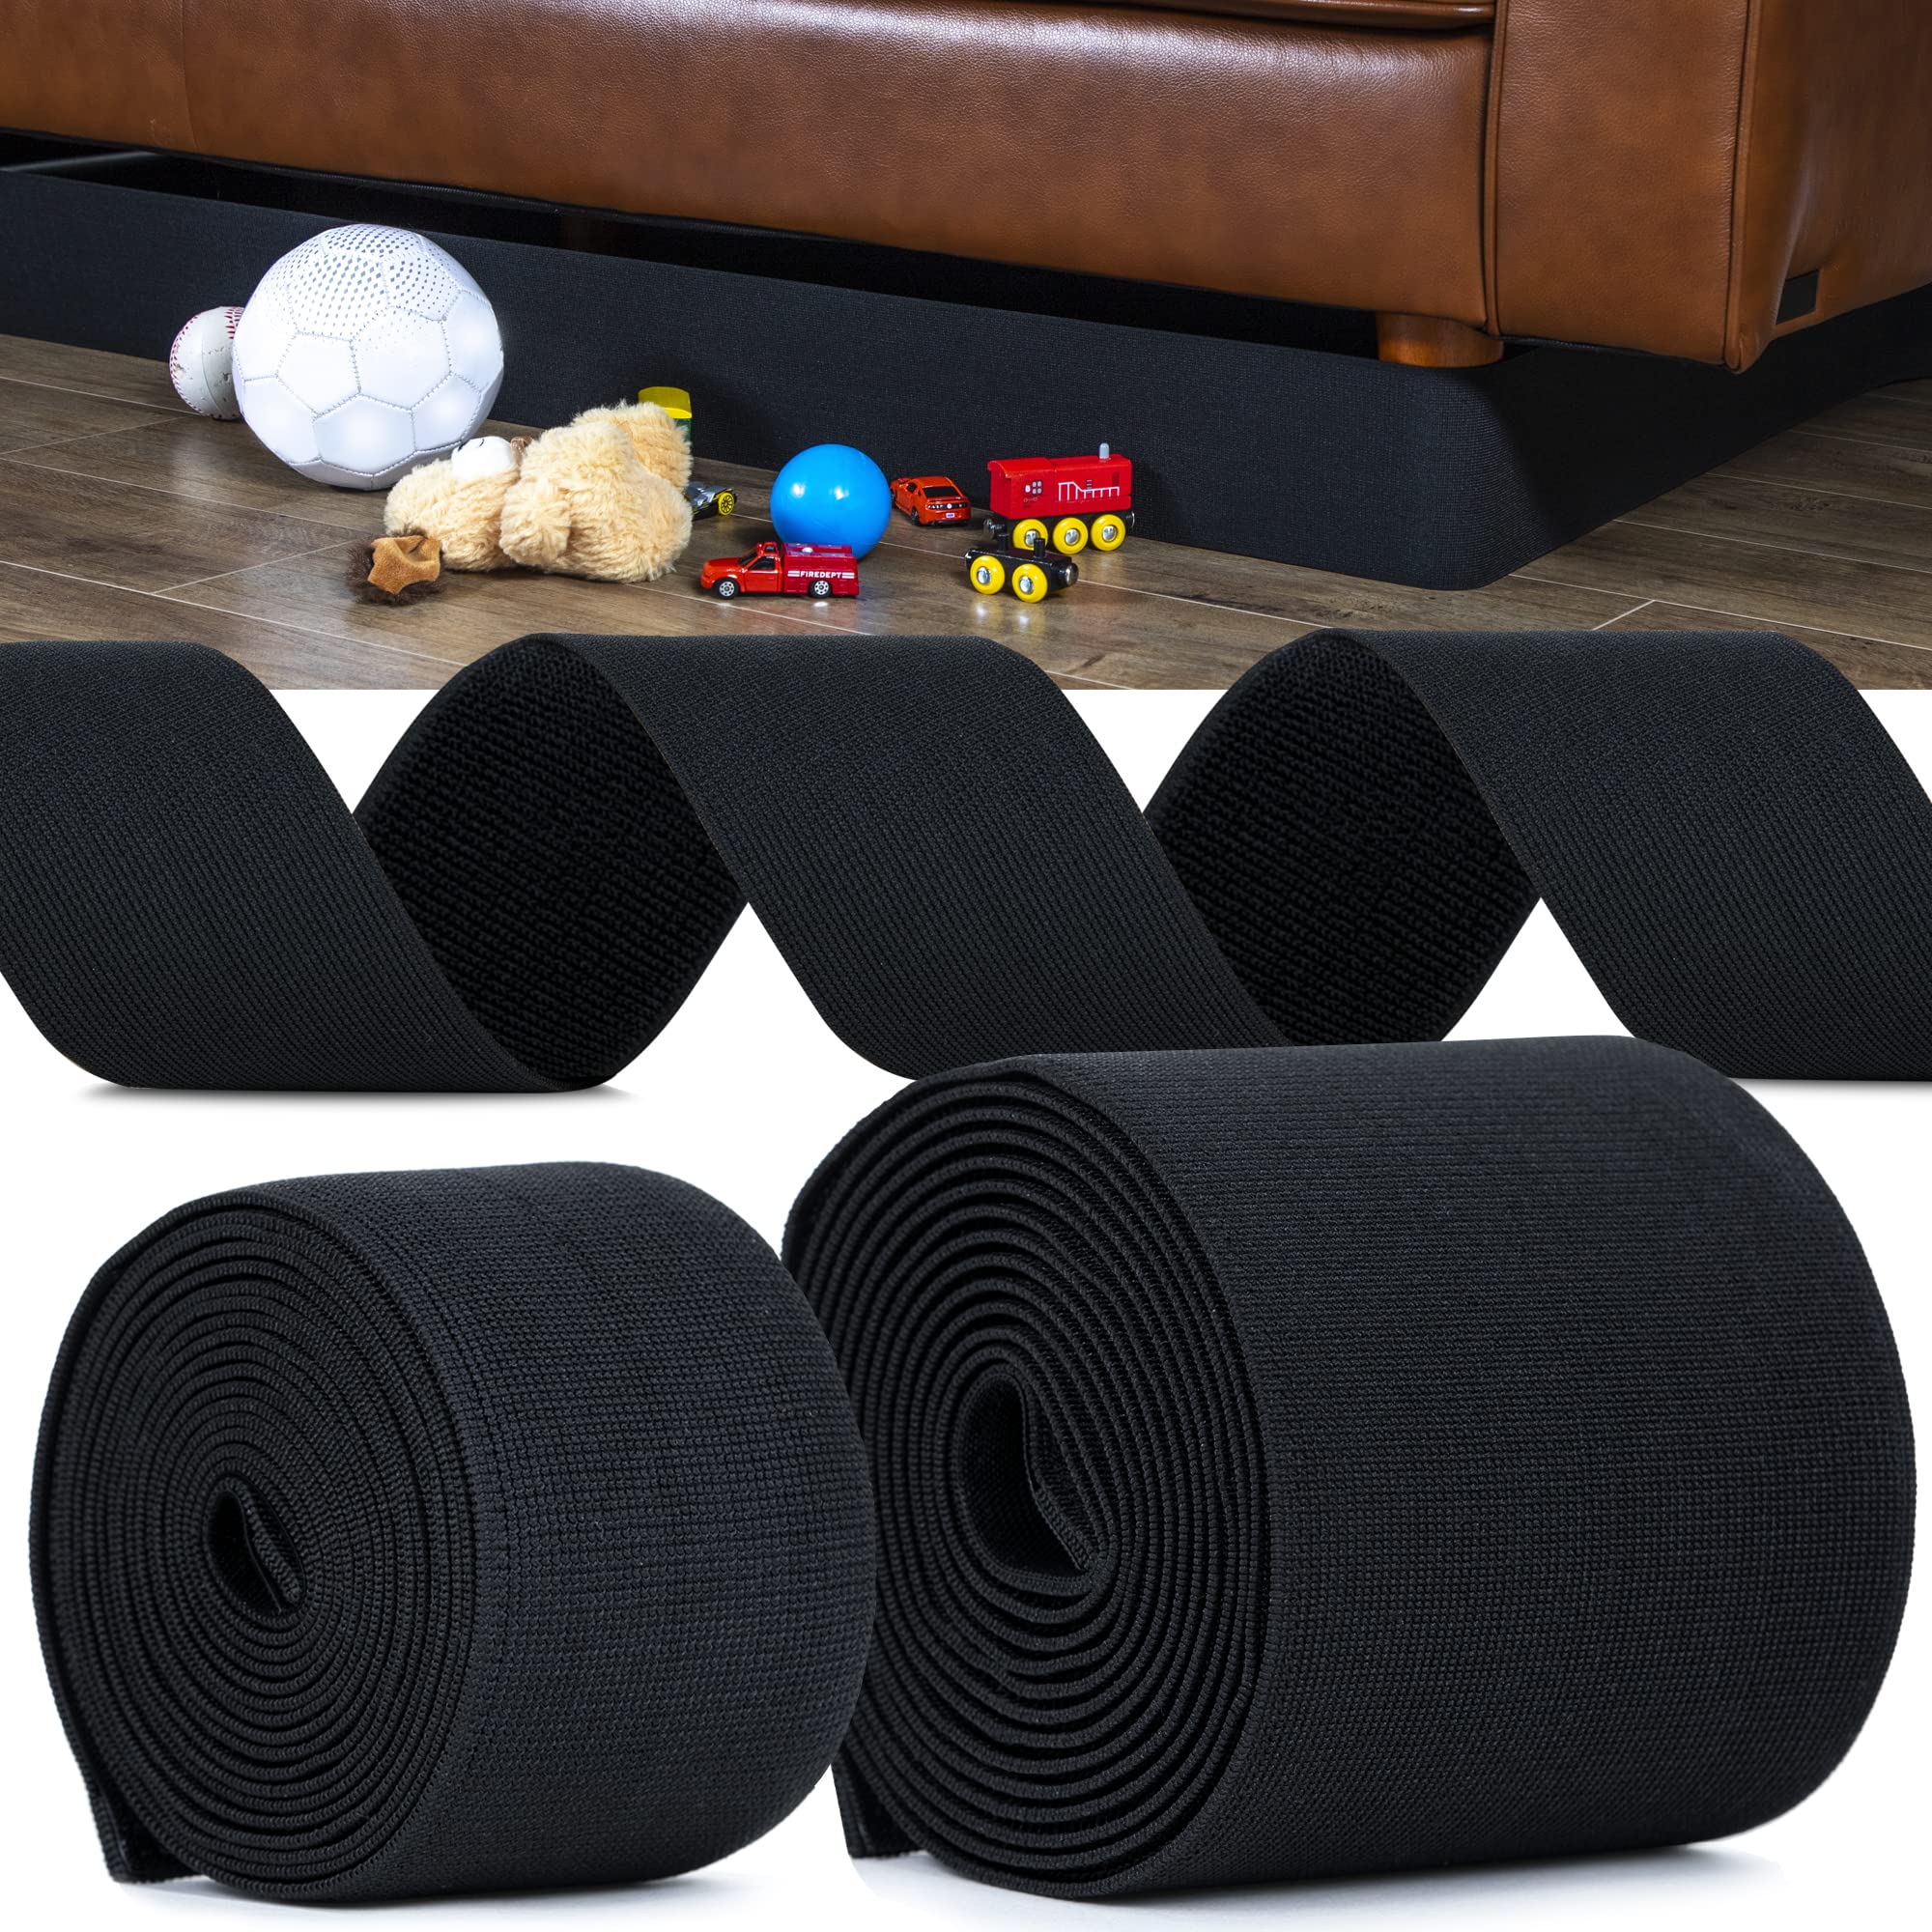 Phildahome Under Couch Blocker For Kid And Pet Toys, Toy Blocker For Under  Couch, Fits Standard Couches With Short Legs (132 X 3